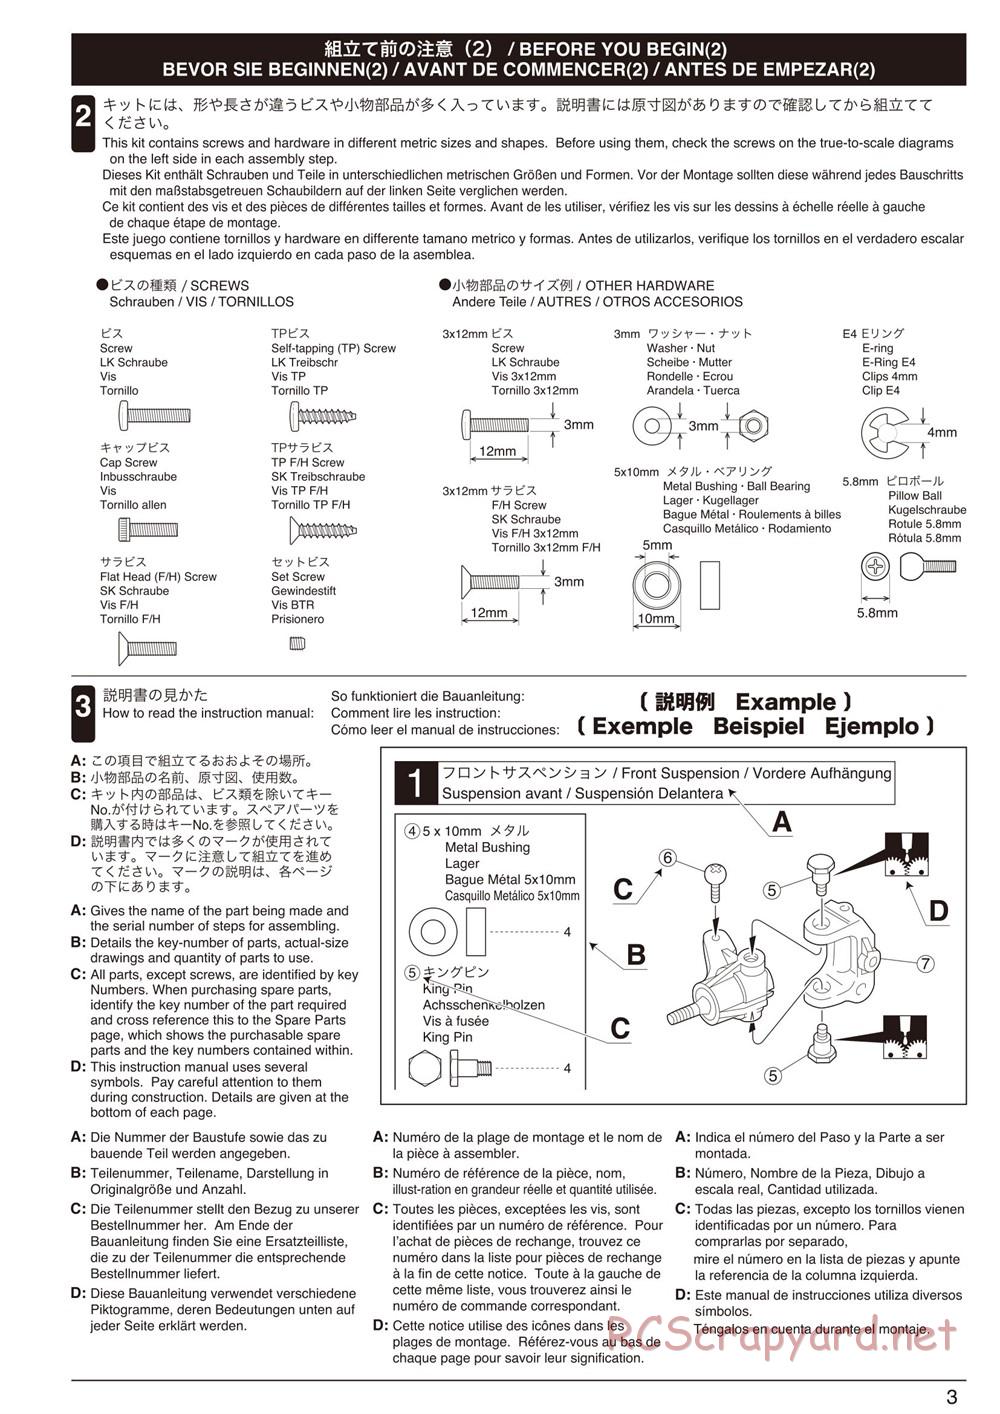 Kyosho - Inferno Neo ST - Manual - Page 3